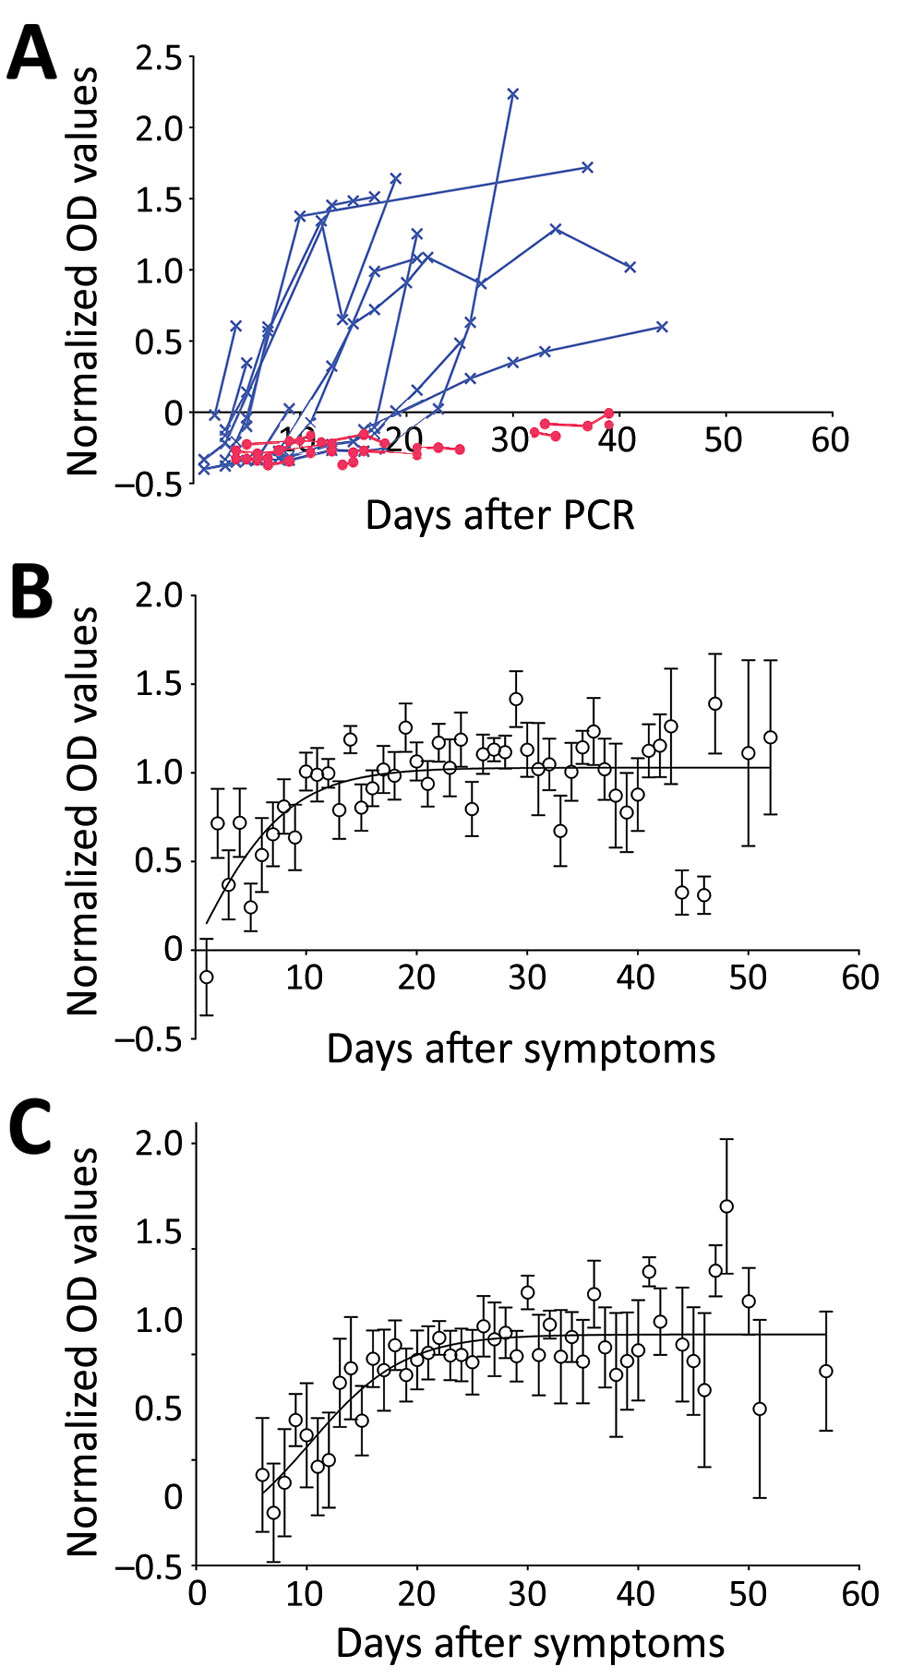 Antibody dynamics in patients with severe acute respiratory syndrome coronavirus 2, United Kingdom, 2020. A) NOD by days after first positive PCR result. Blue indicates seroconverting patients; red indicates nonseroconverting patients. B) Mean (± SEM) NODs (>3 samples per time point; n = 48) by days after first positive PCR result for those who seroconverted. A 4-parameter sigmoidal unconstrained model is shown (r2 = 0.45). C) Mean (± SEM) NODs (>3 per time point; n = 45) by days after symptom onset for patients who seroconverted. A 4-parameter sigmoidal unconstrained model is shown (r2 = 0.63). NOD, normalized optical density.